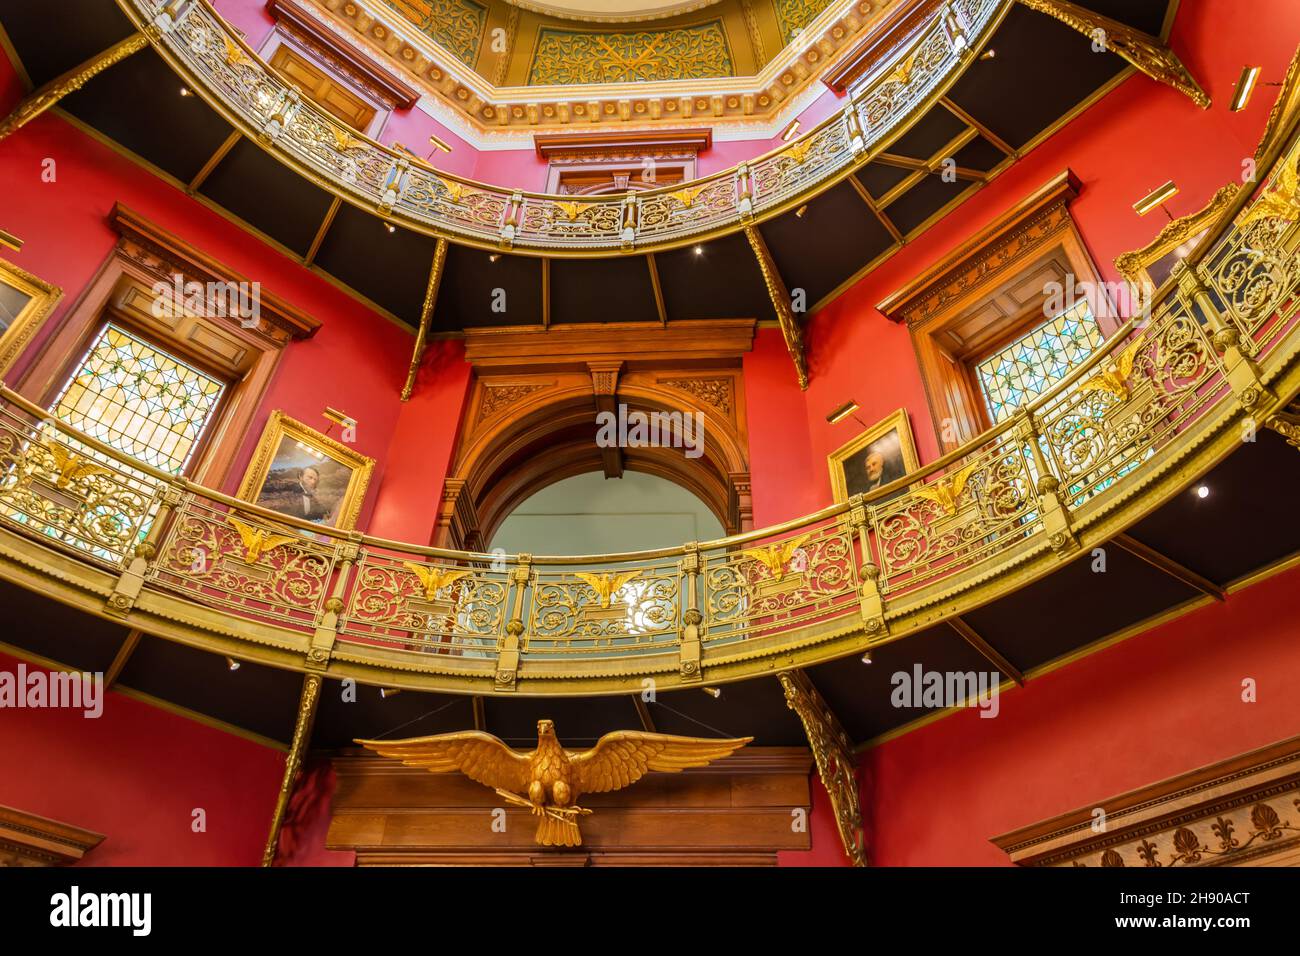 Trenton, New Jersey, United States of America – September 6, 2016. Interior view of the New Jersey State House in Trenton, NJ. View of the rotunda wit Stock Photo